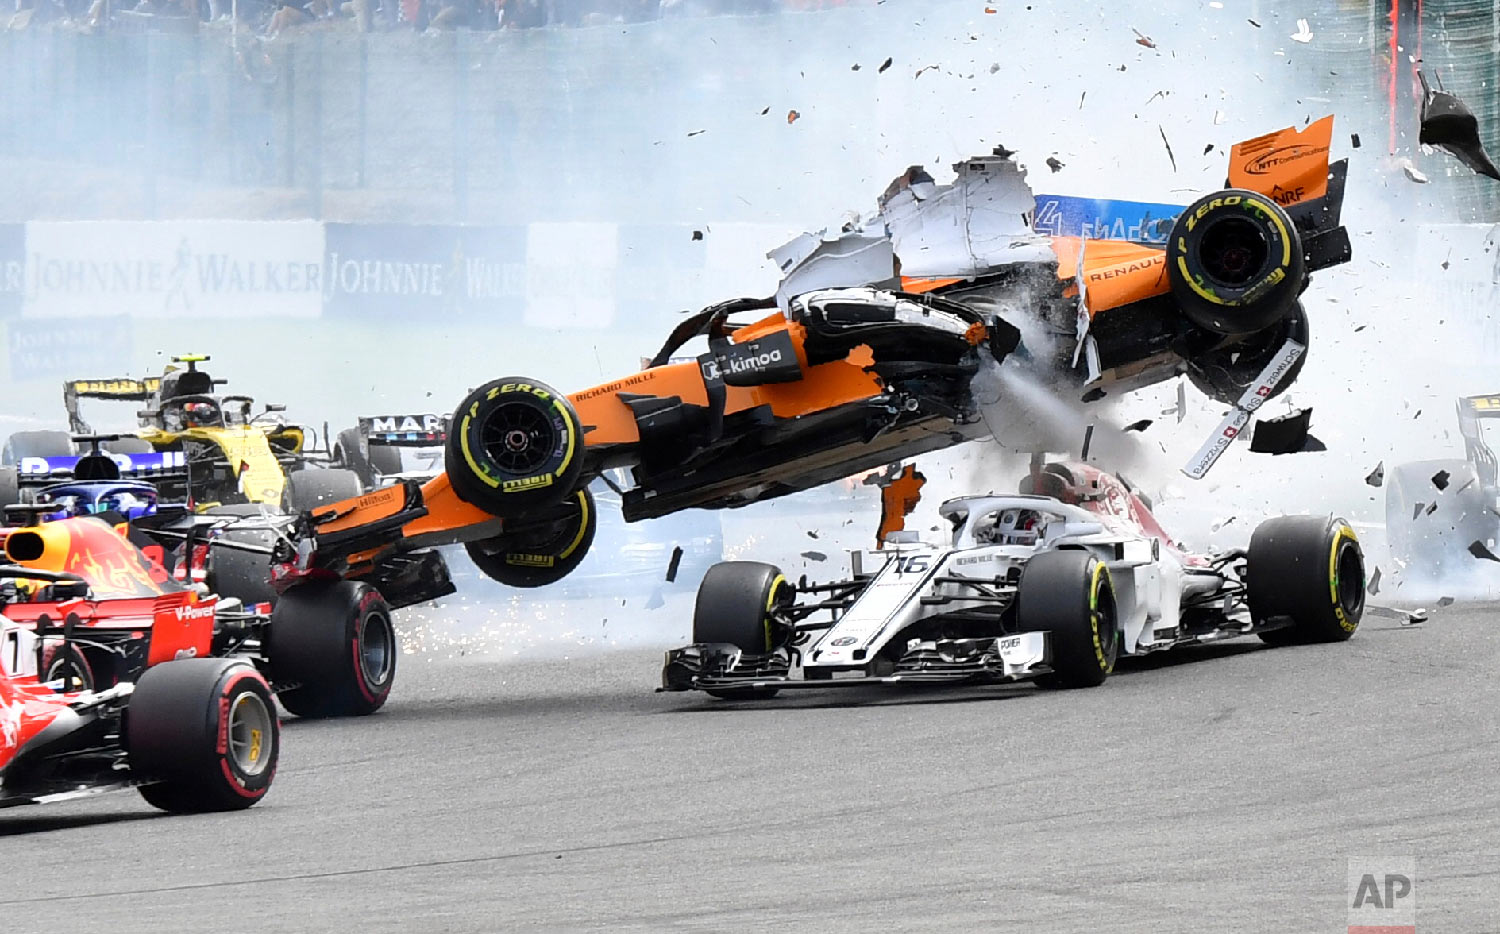  Mclaren driver Fernando Alonso of Spain, top, goes over the top of Sauber driver Charles Leclerc of Monaco as they are involved in a crash at the start of the Belgian Formula One Grand Prix in Spa-Francorchamps, Belgium on Aug. 26, 2018. (AP Photo/G